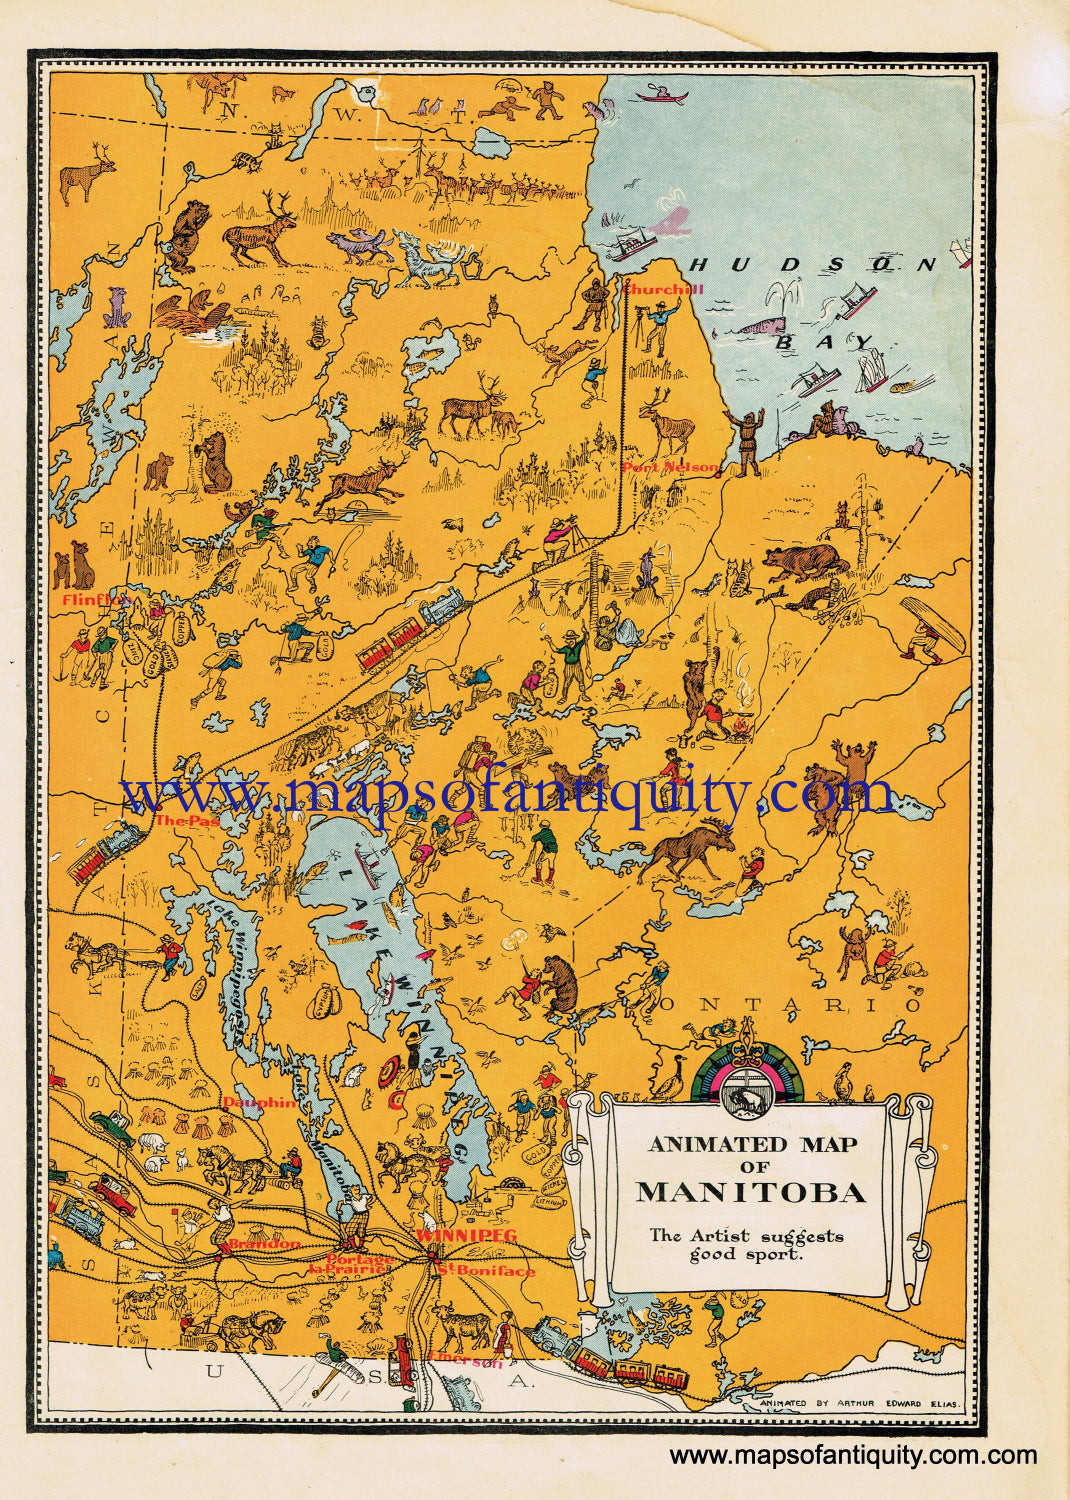 Antique-Printed-Color-Pictorial-Map-Animated-Map-of-Manitoba-**********-North-America-Canada-1940s-Arthur-Edward-Elias-Maps-Of-Antiquity